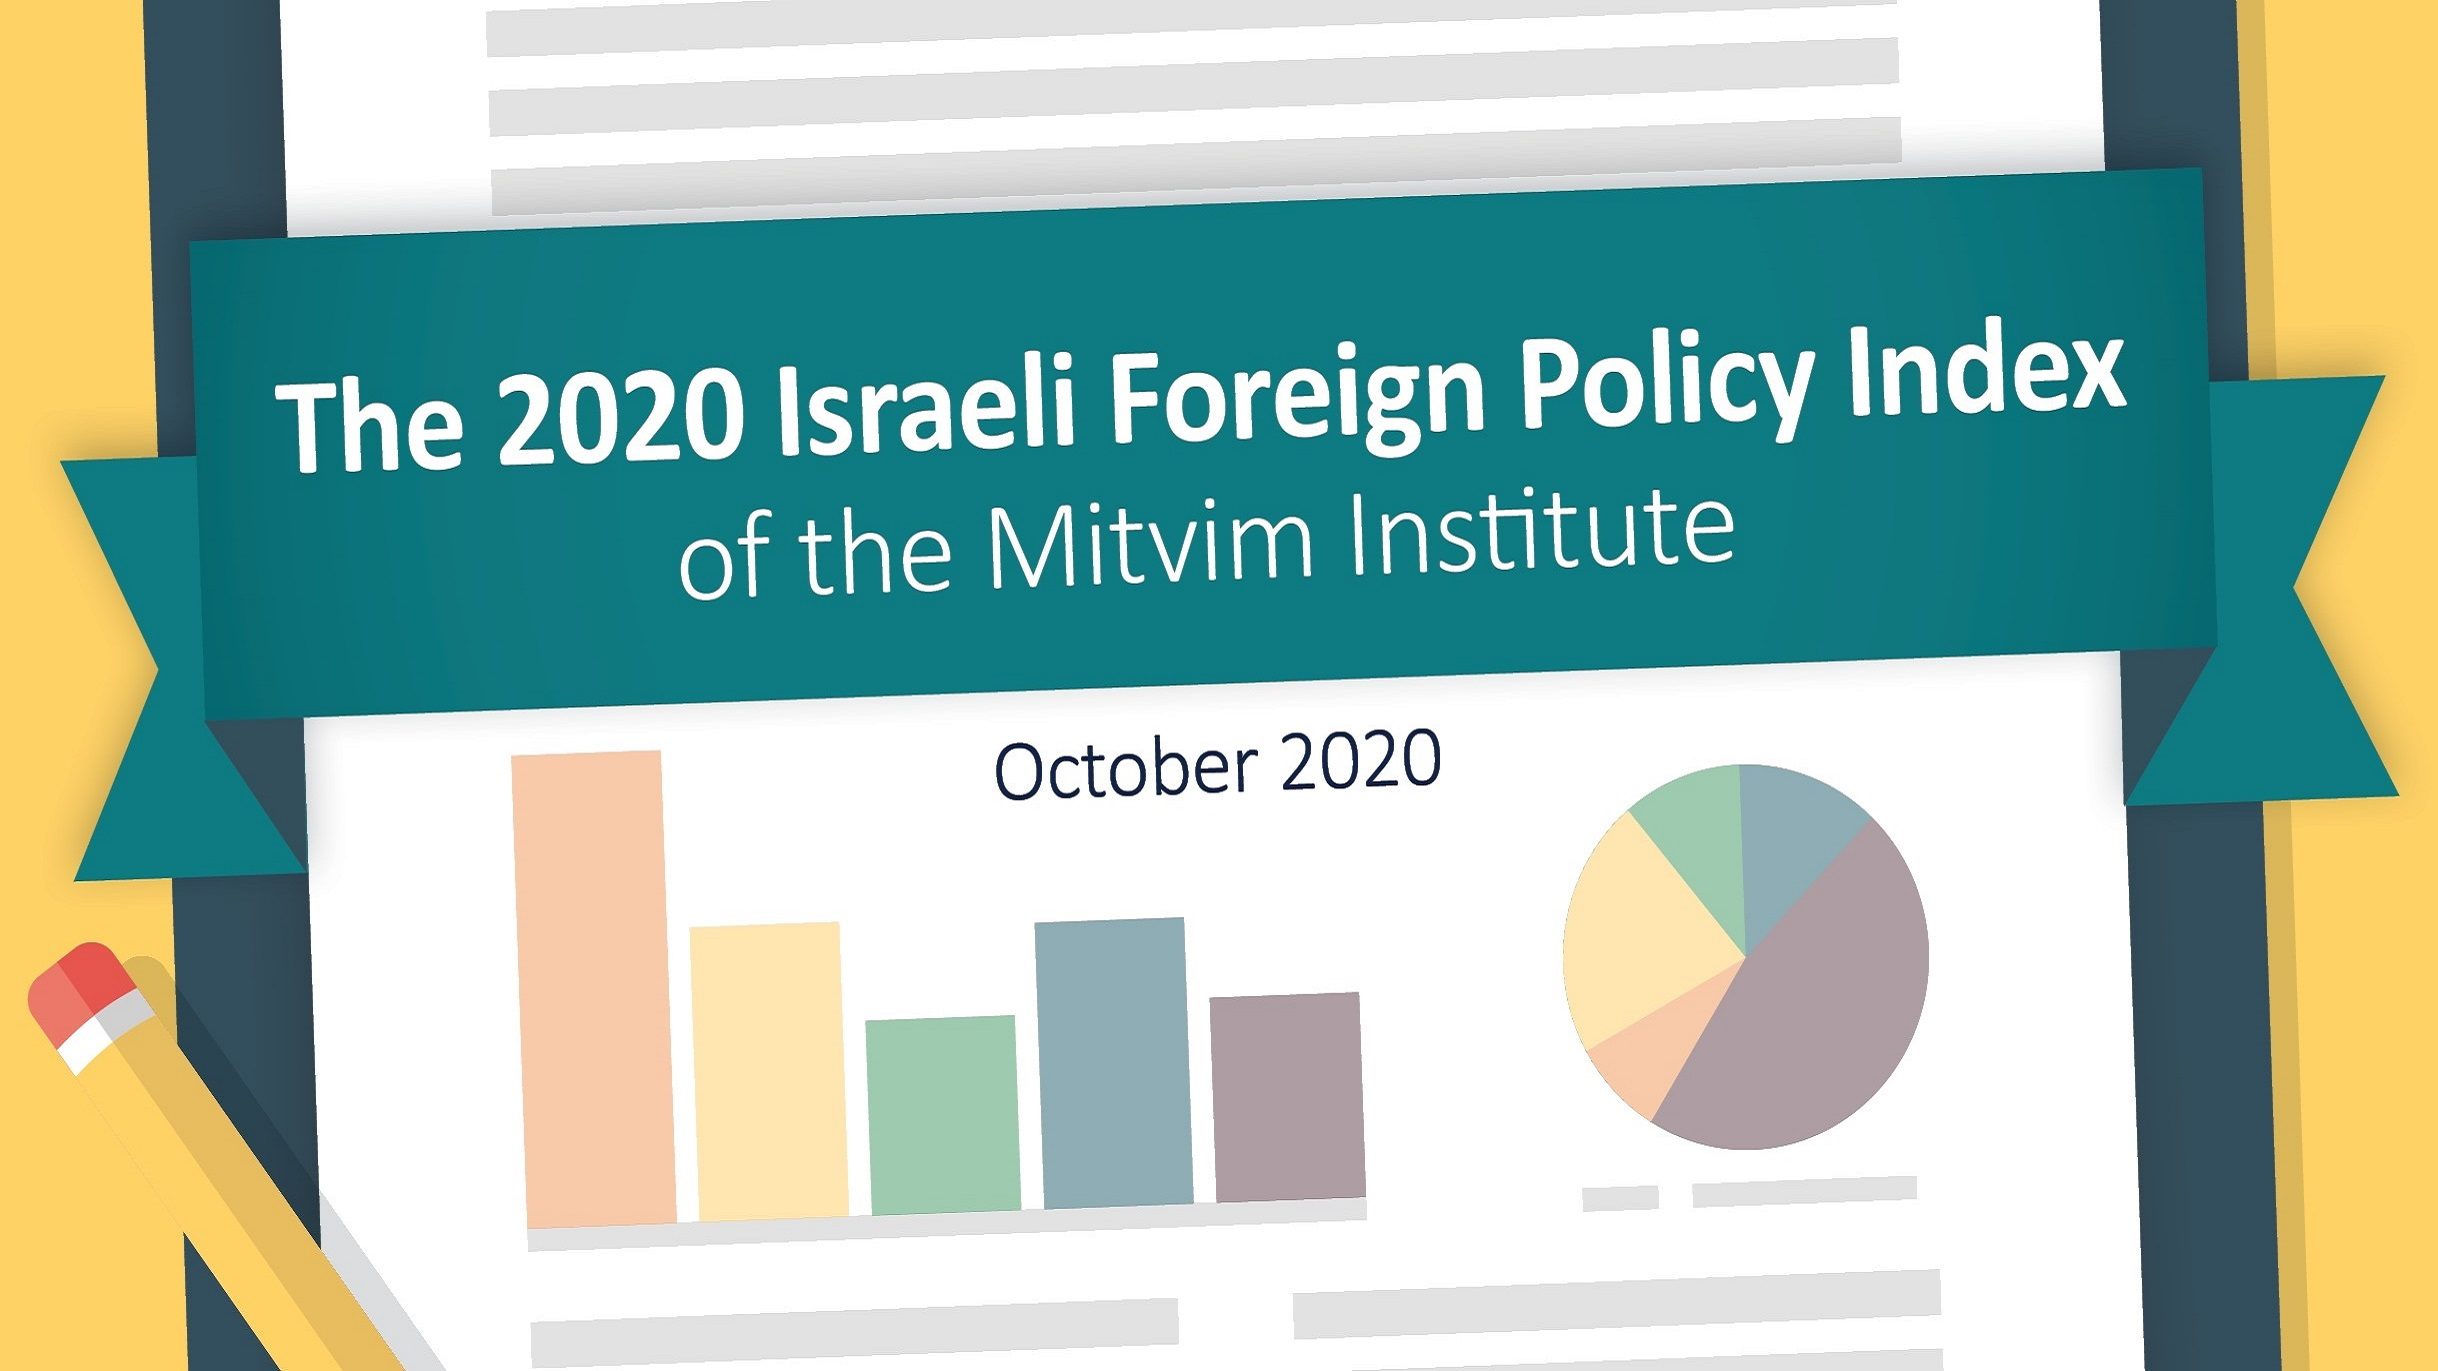 Exclusive Briefing on Mitvim’s 2020 Israeli Foreign Policy Index